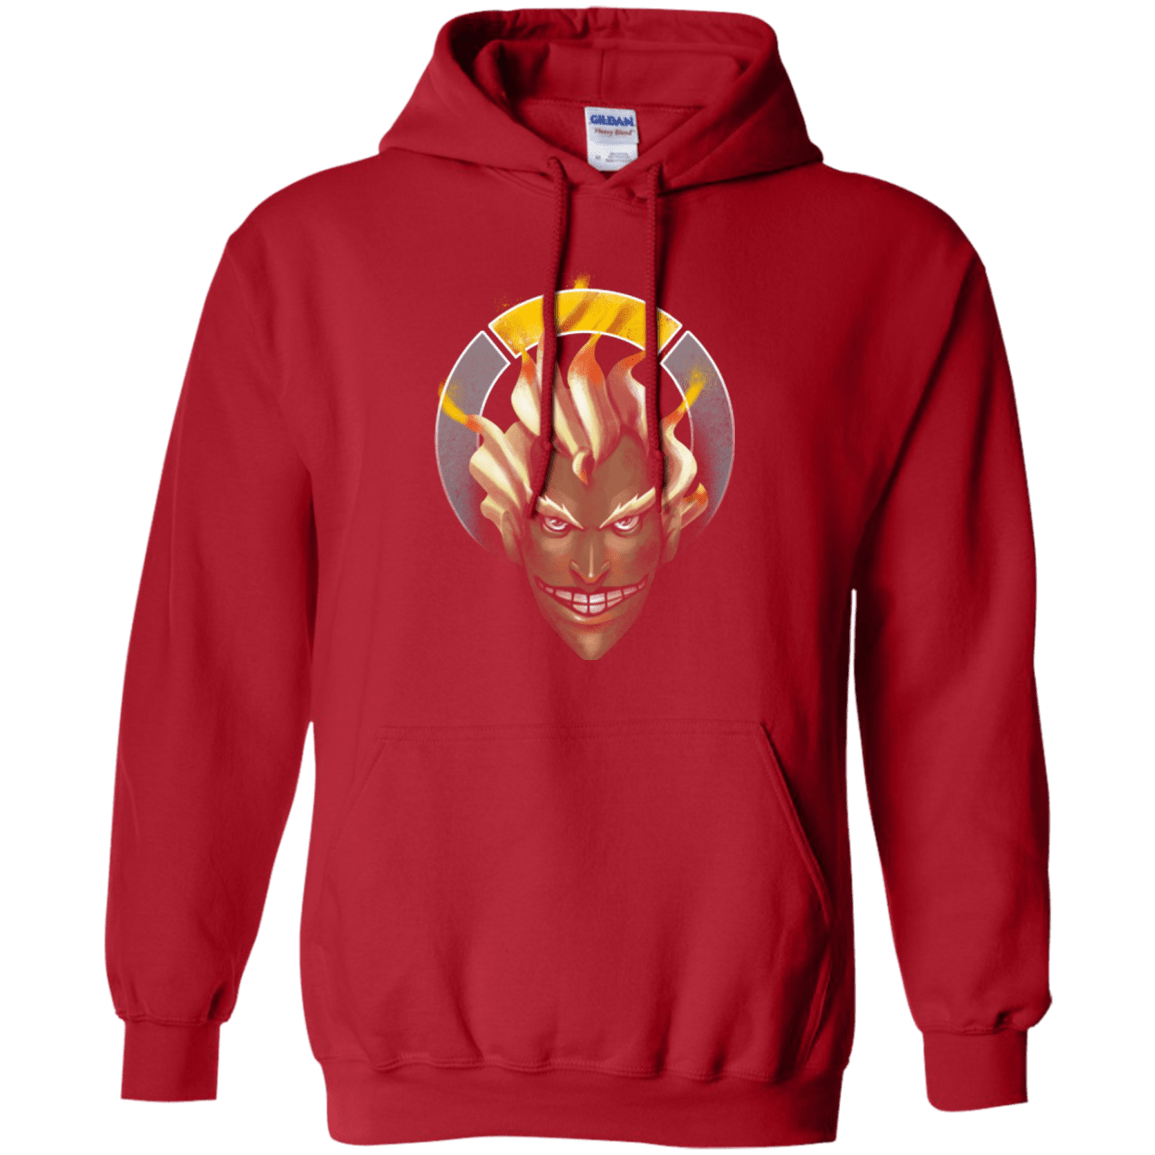 Sweatshirts Red / Small The Freak Pullover Hoodie